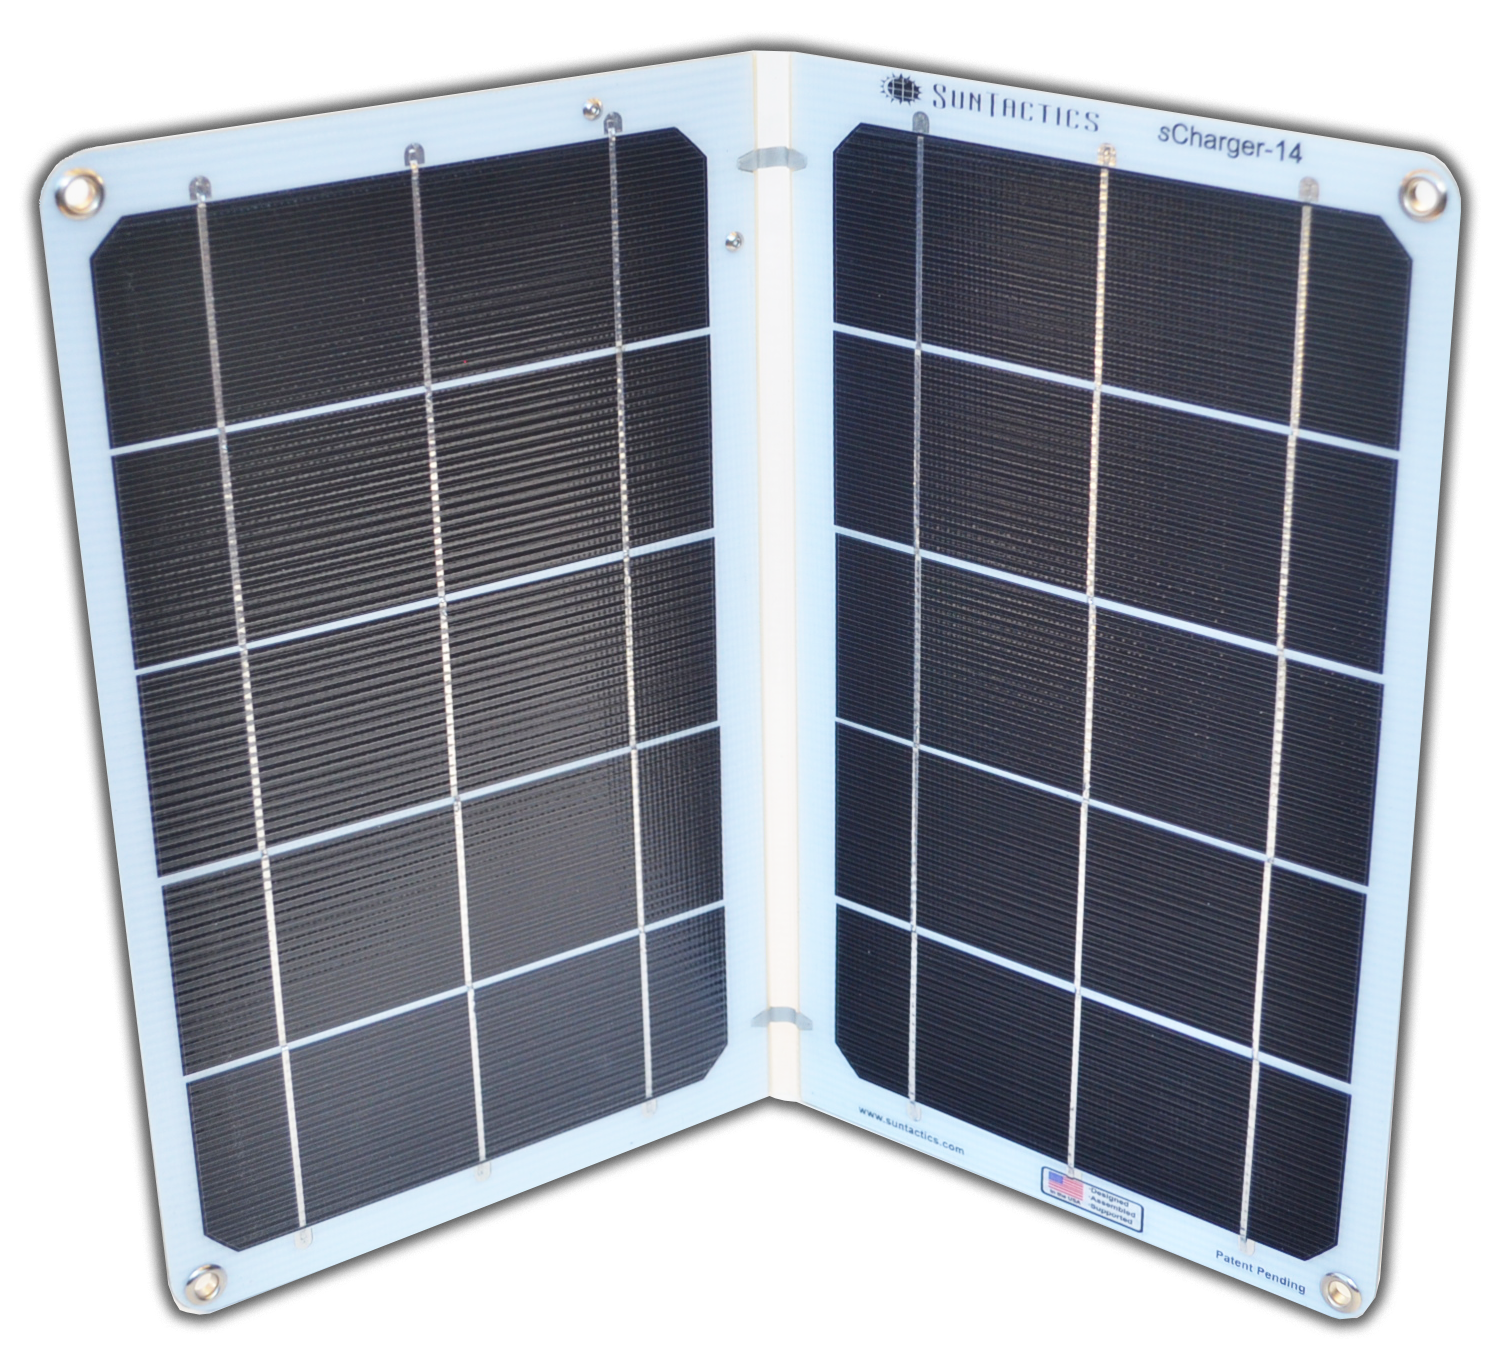 sCharger-14 Portable Solar Charger